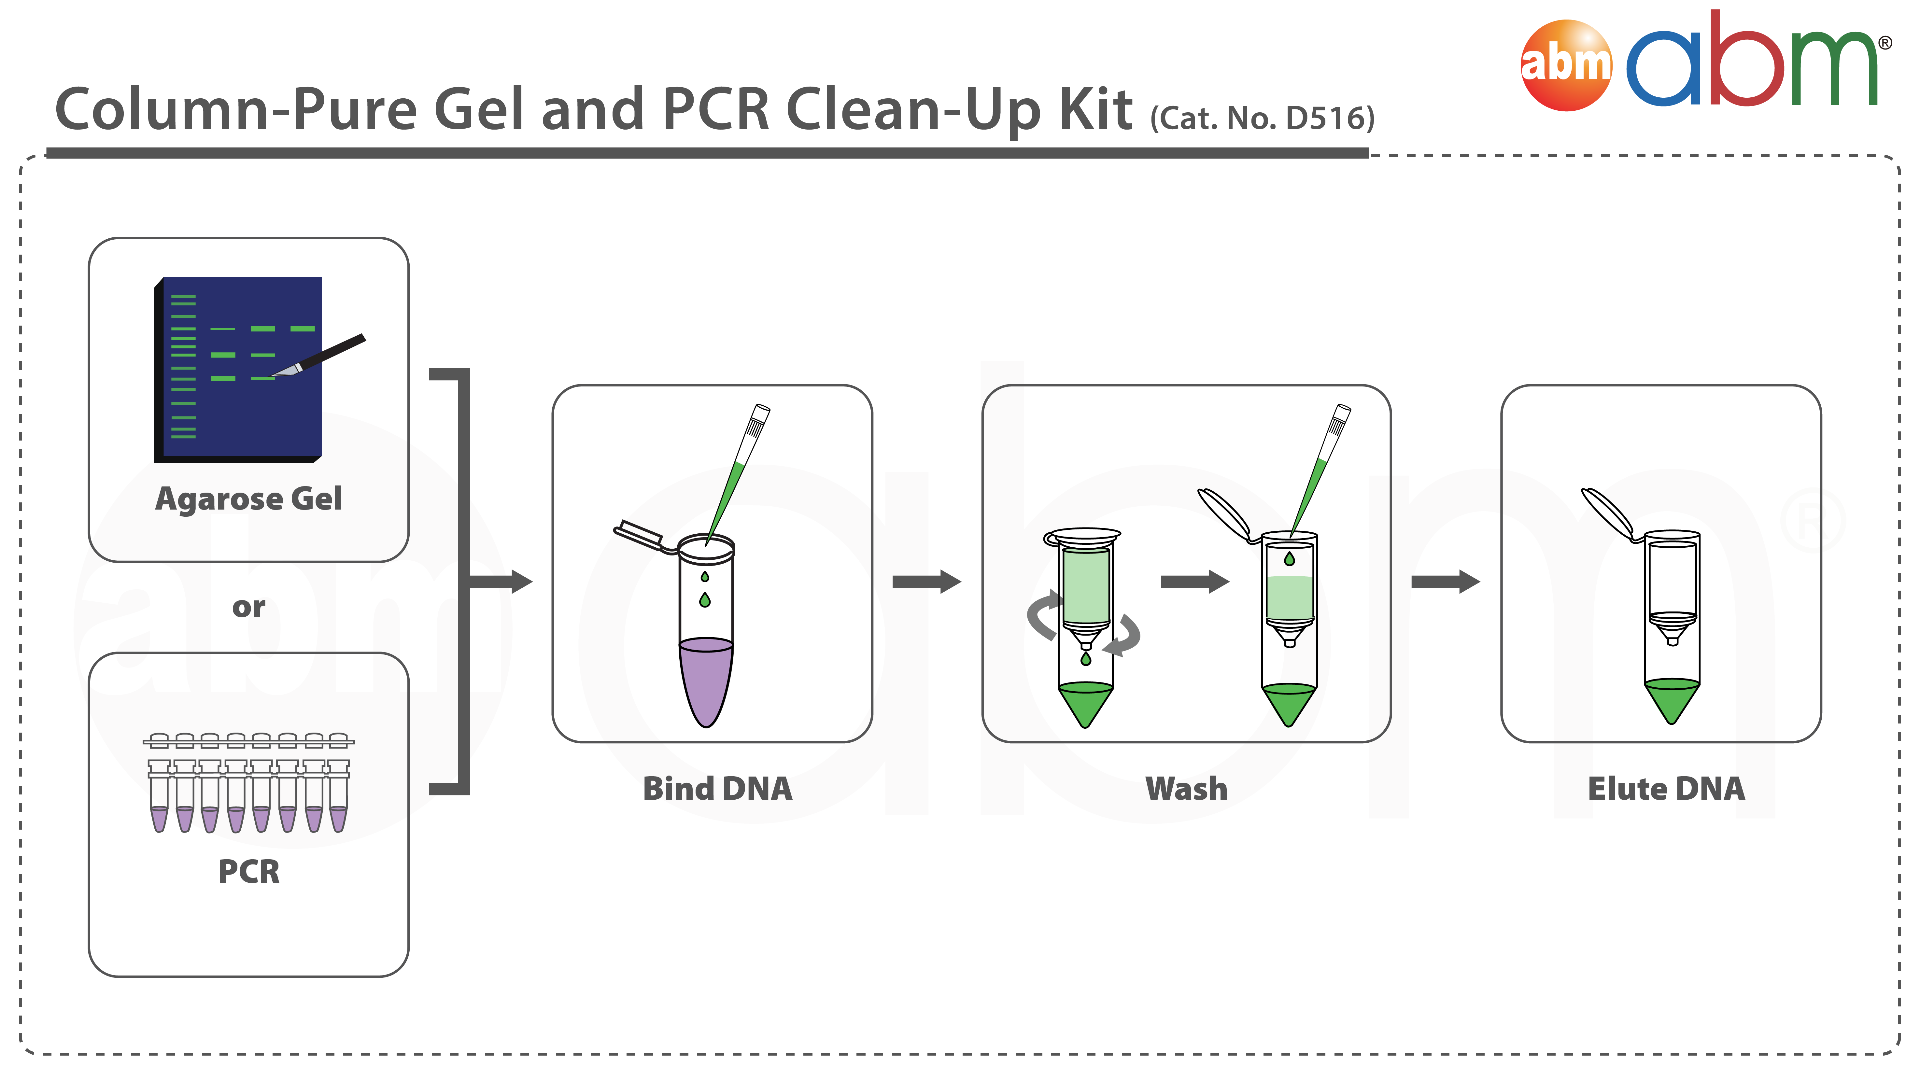 Column-Pure Gel and PCR Clean-Up Kit